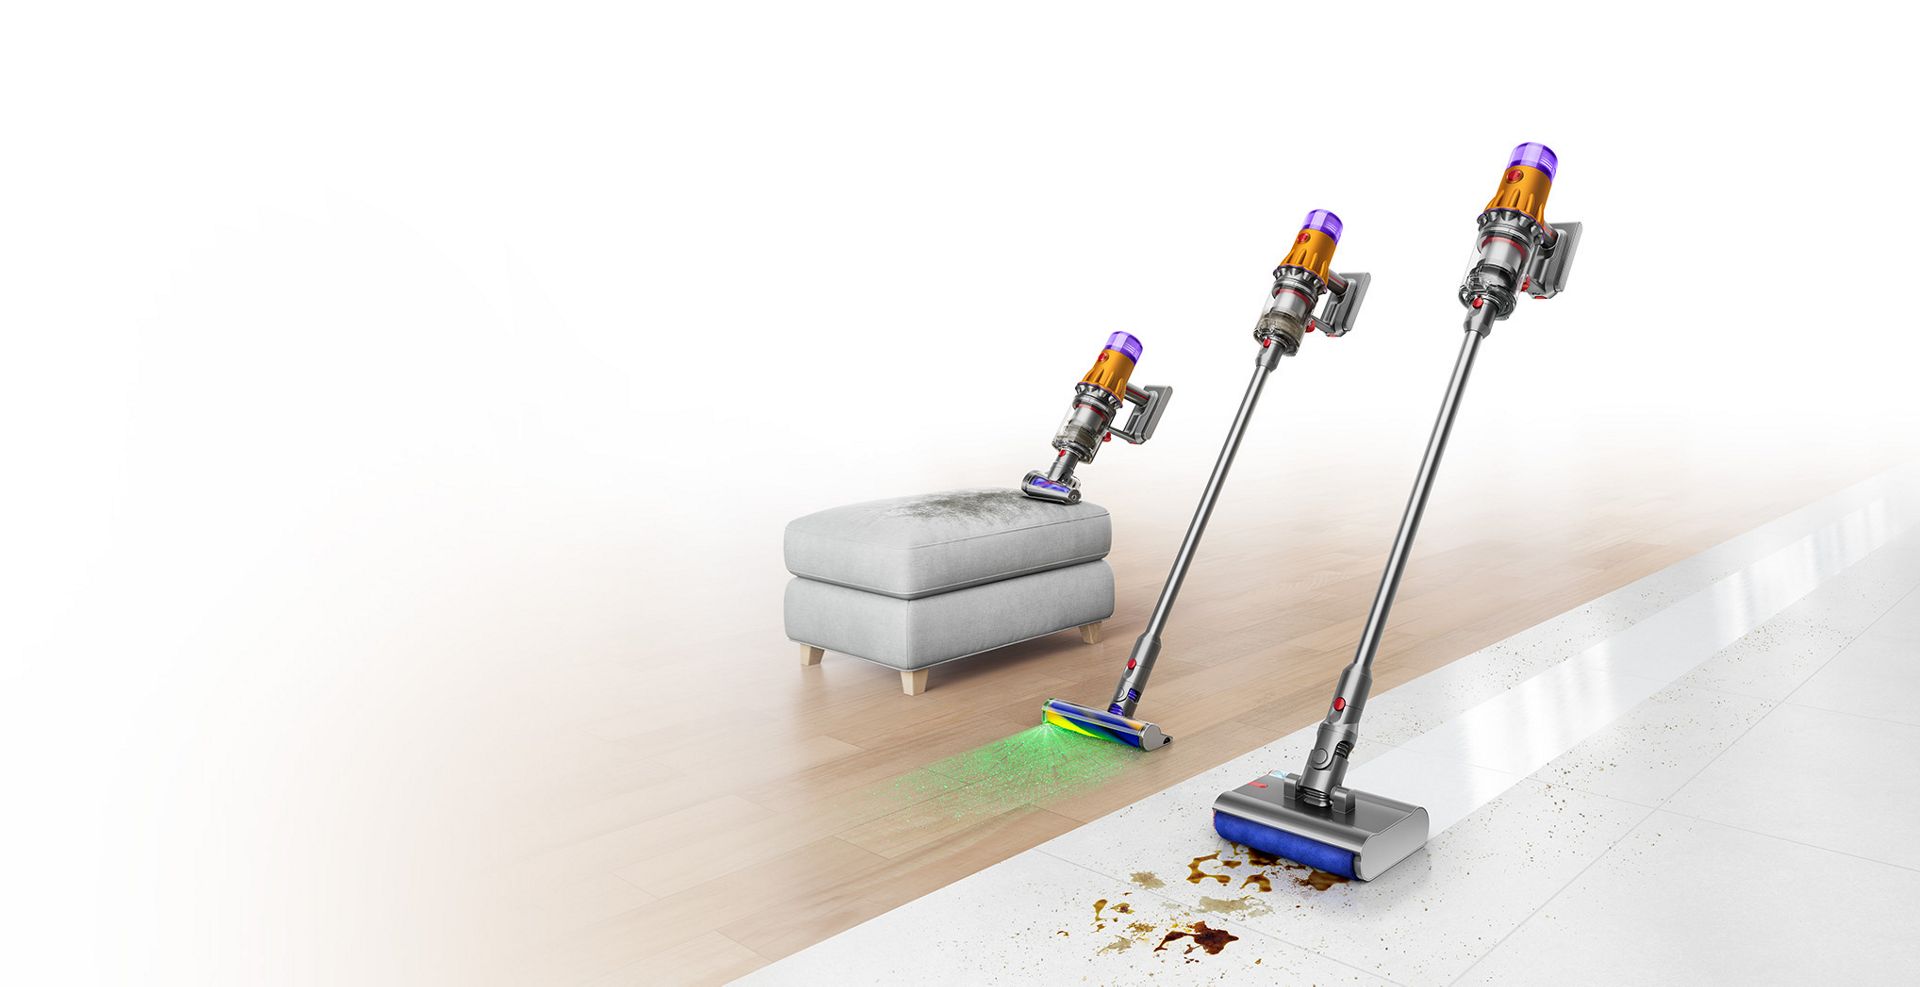 The Best Dyson Vacuums (2024): V15, V12, and More